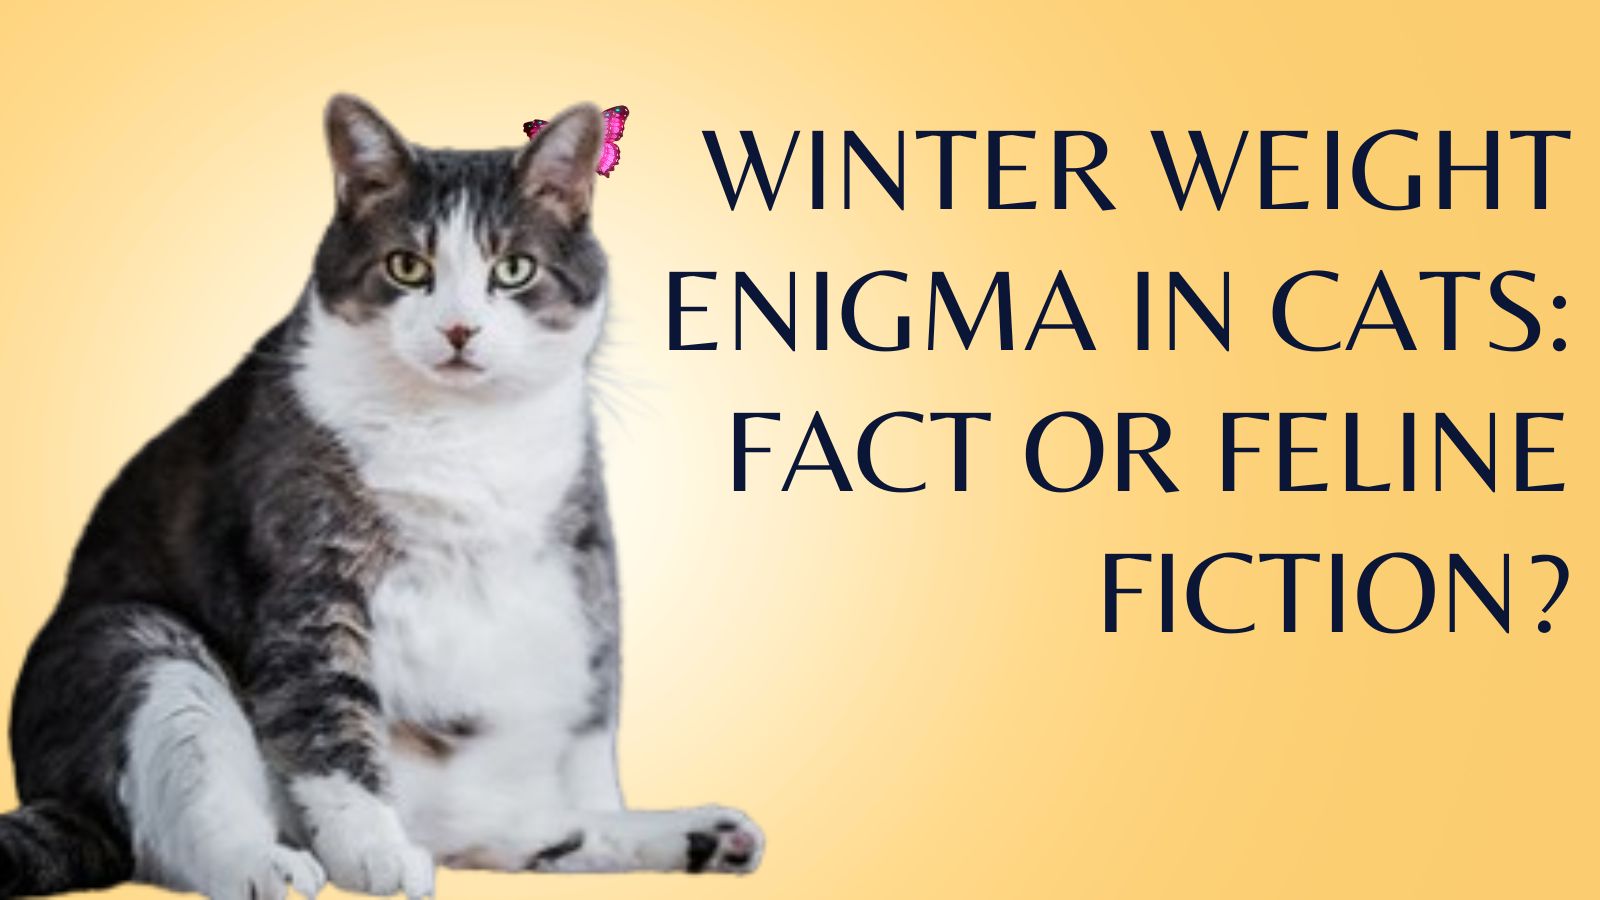 Do cats gain weight in the winter